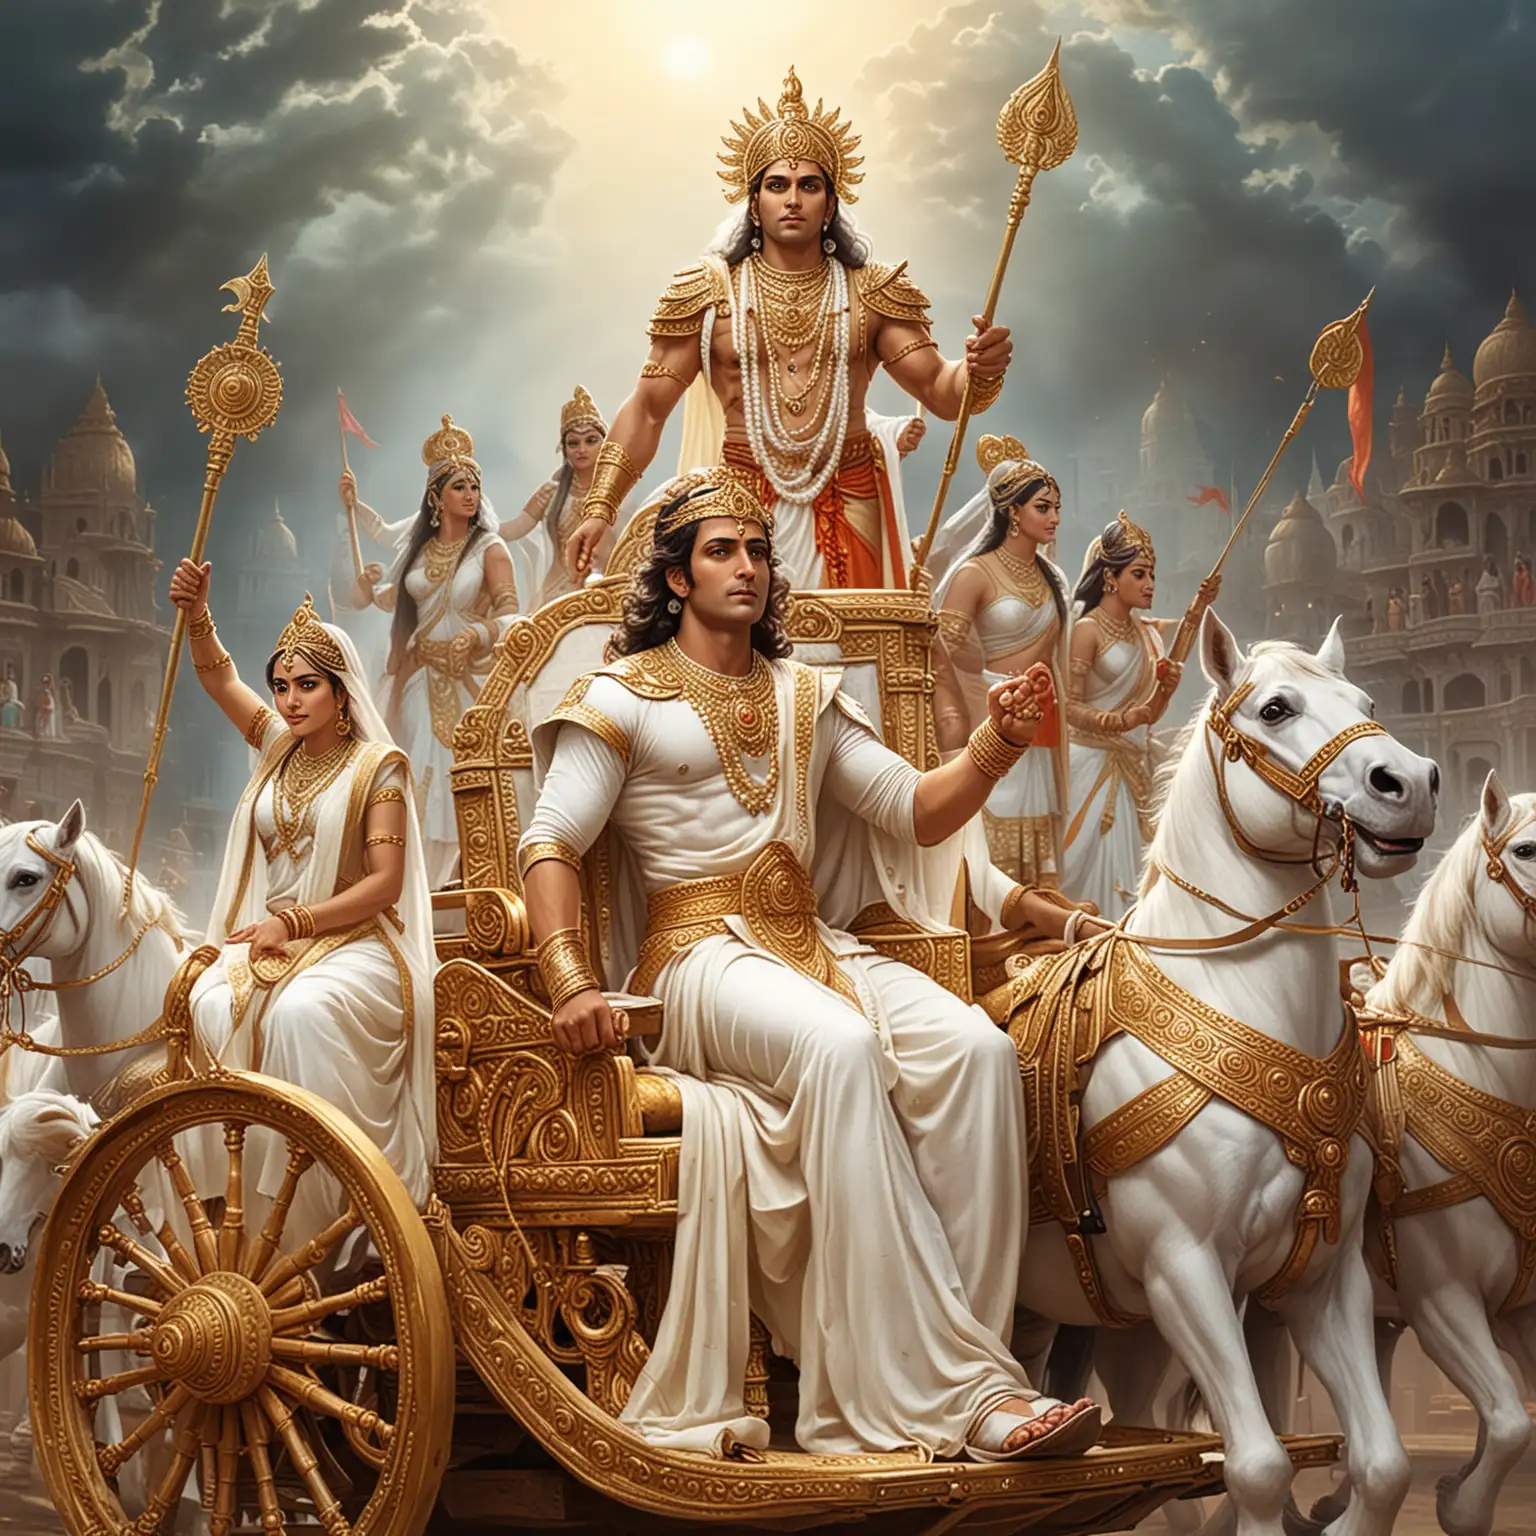 generate mahabharat character bhisma male dressed in white sitting on a chariot with 3 princess
